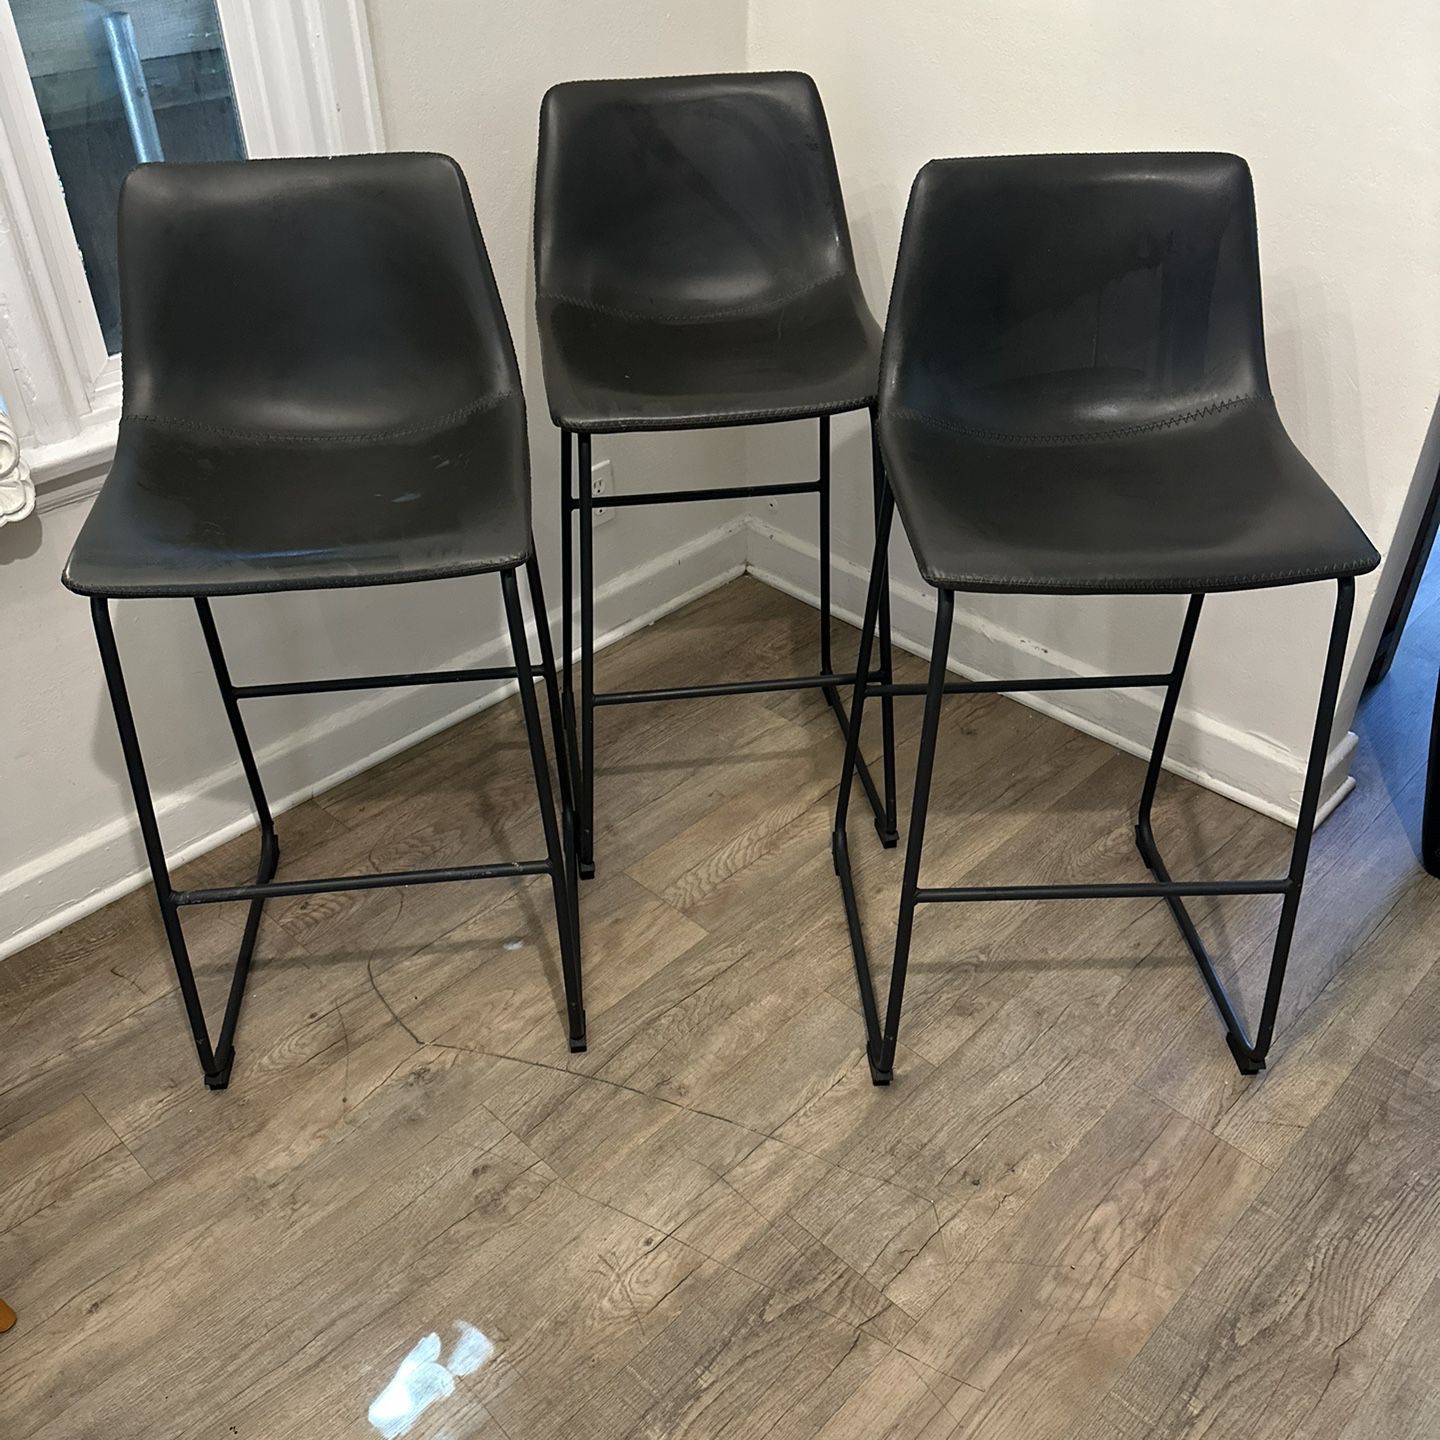 3 Grey Leather High Top Chairs